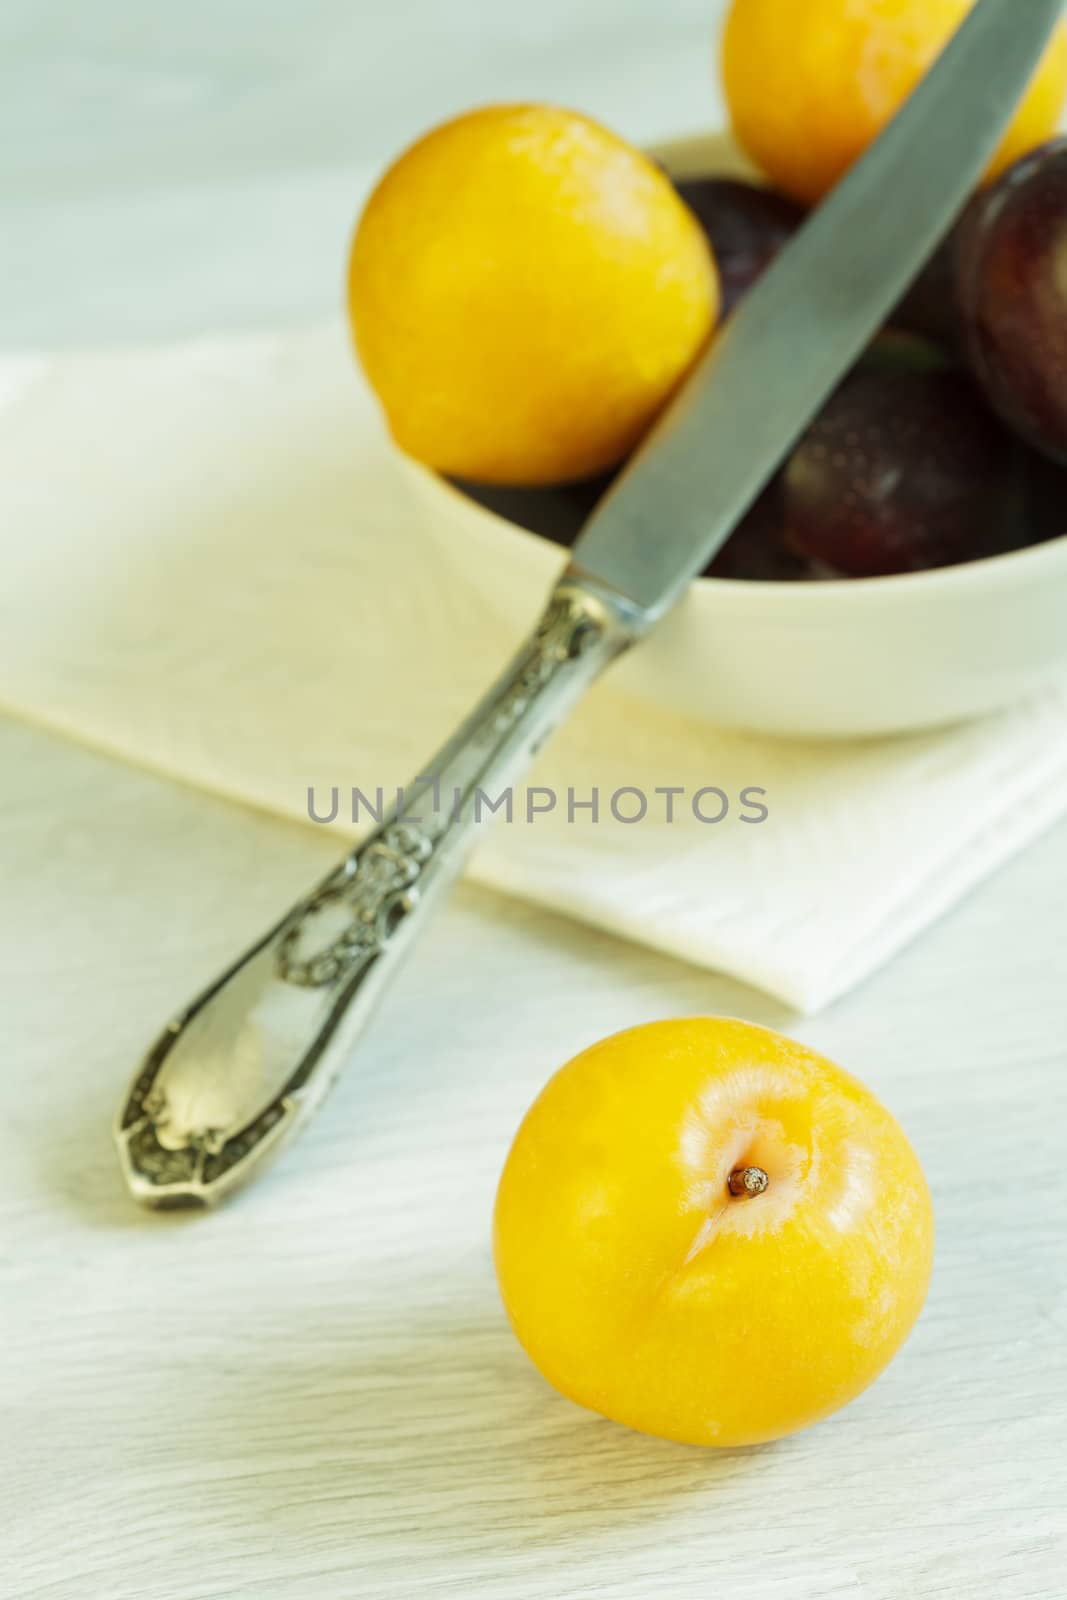 Many plums and knife on the table